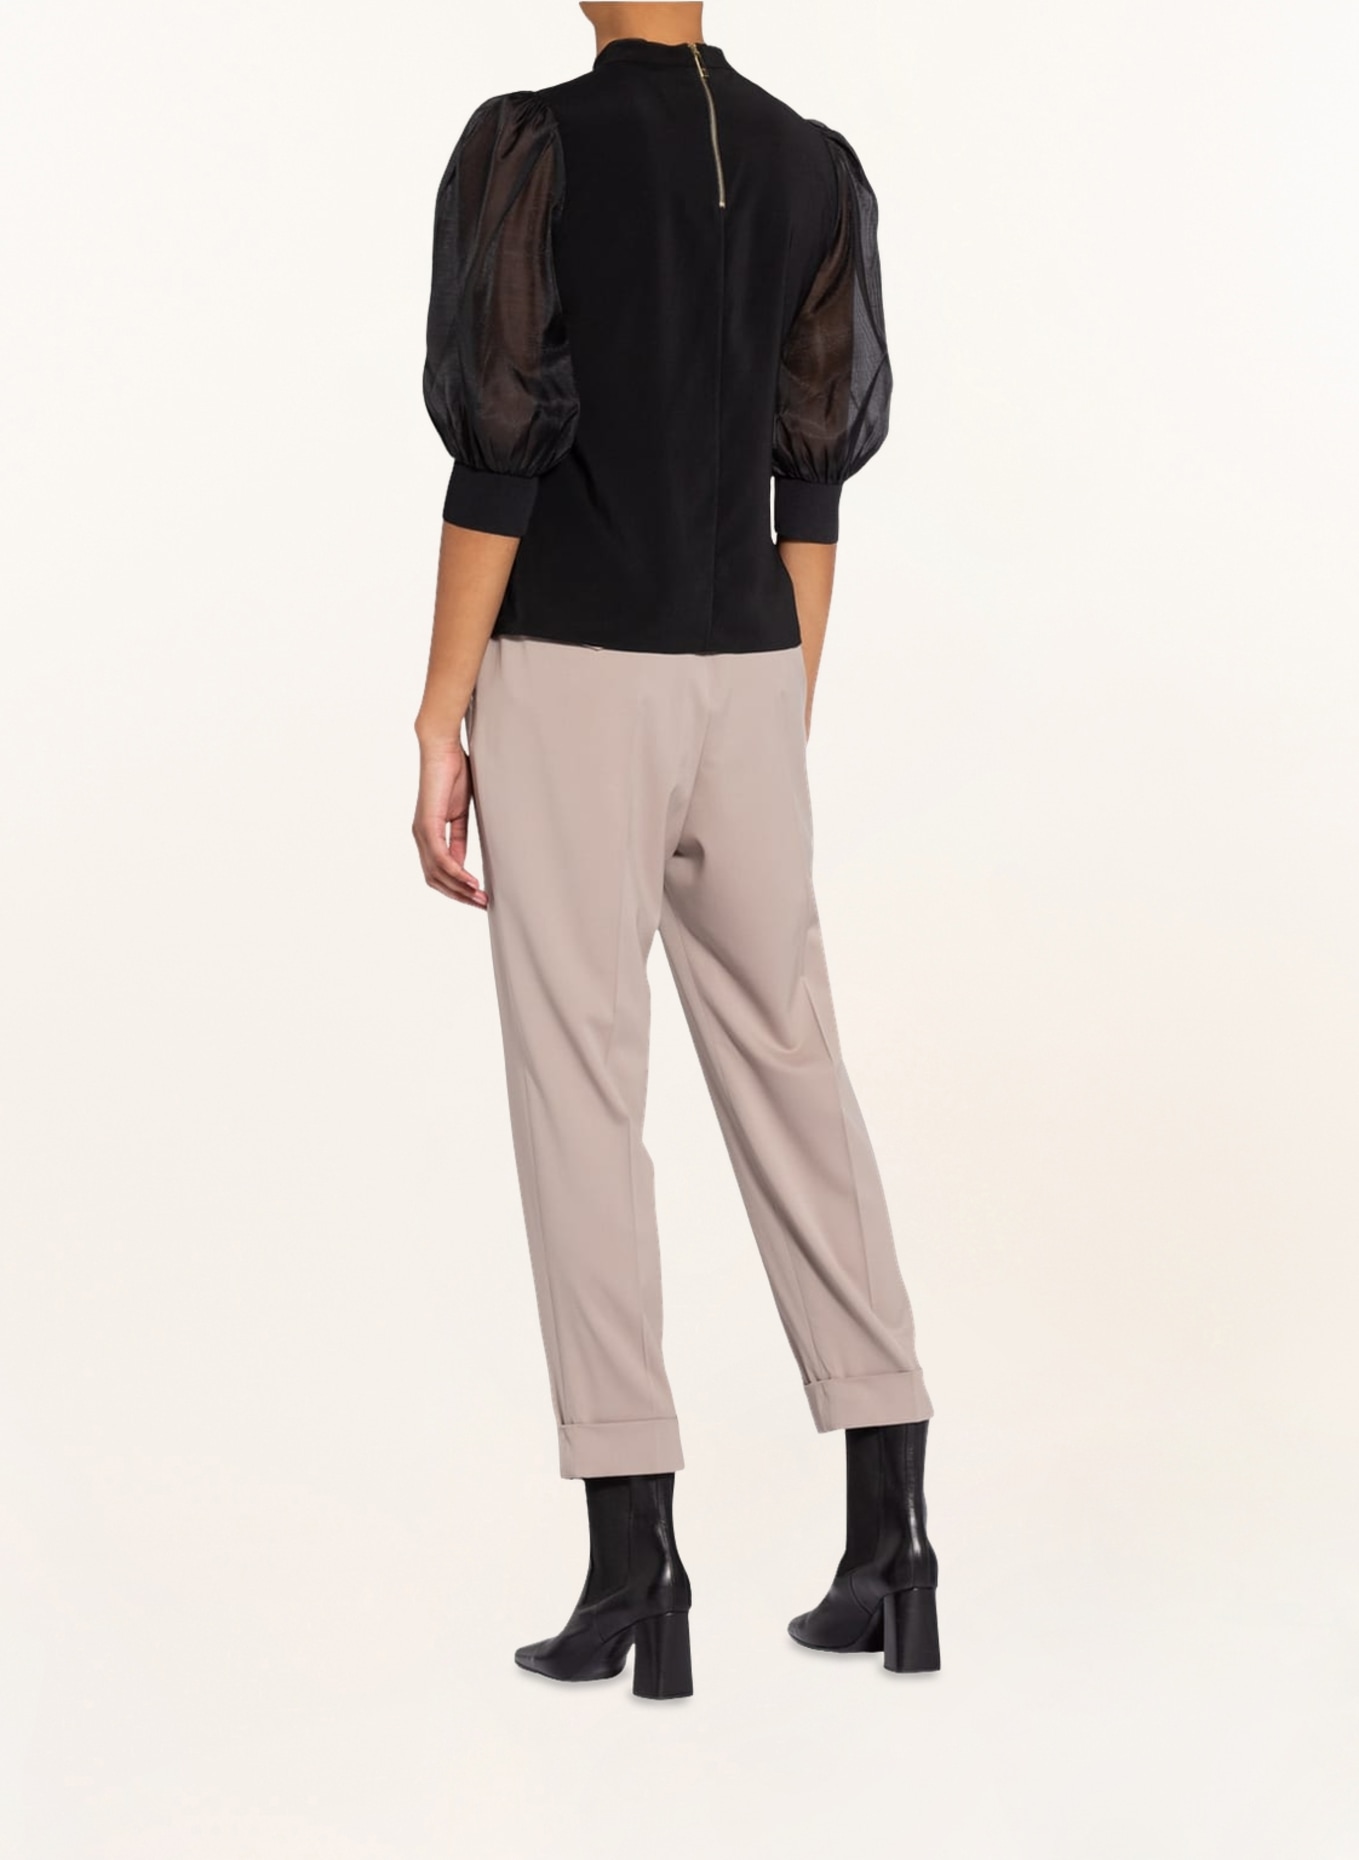 TED BAKER Shirt blouse MICAELI with 3/4 sleeves, Color: BLACK (Image 3)